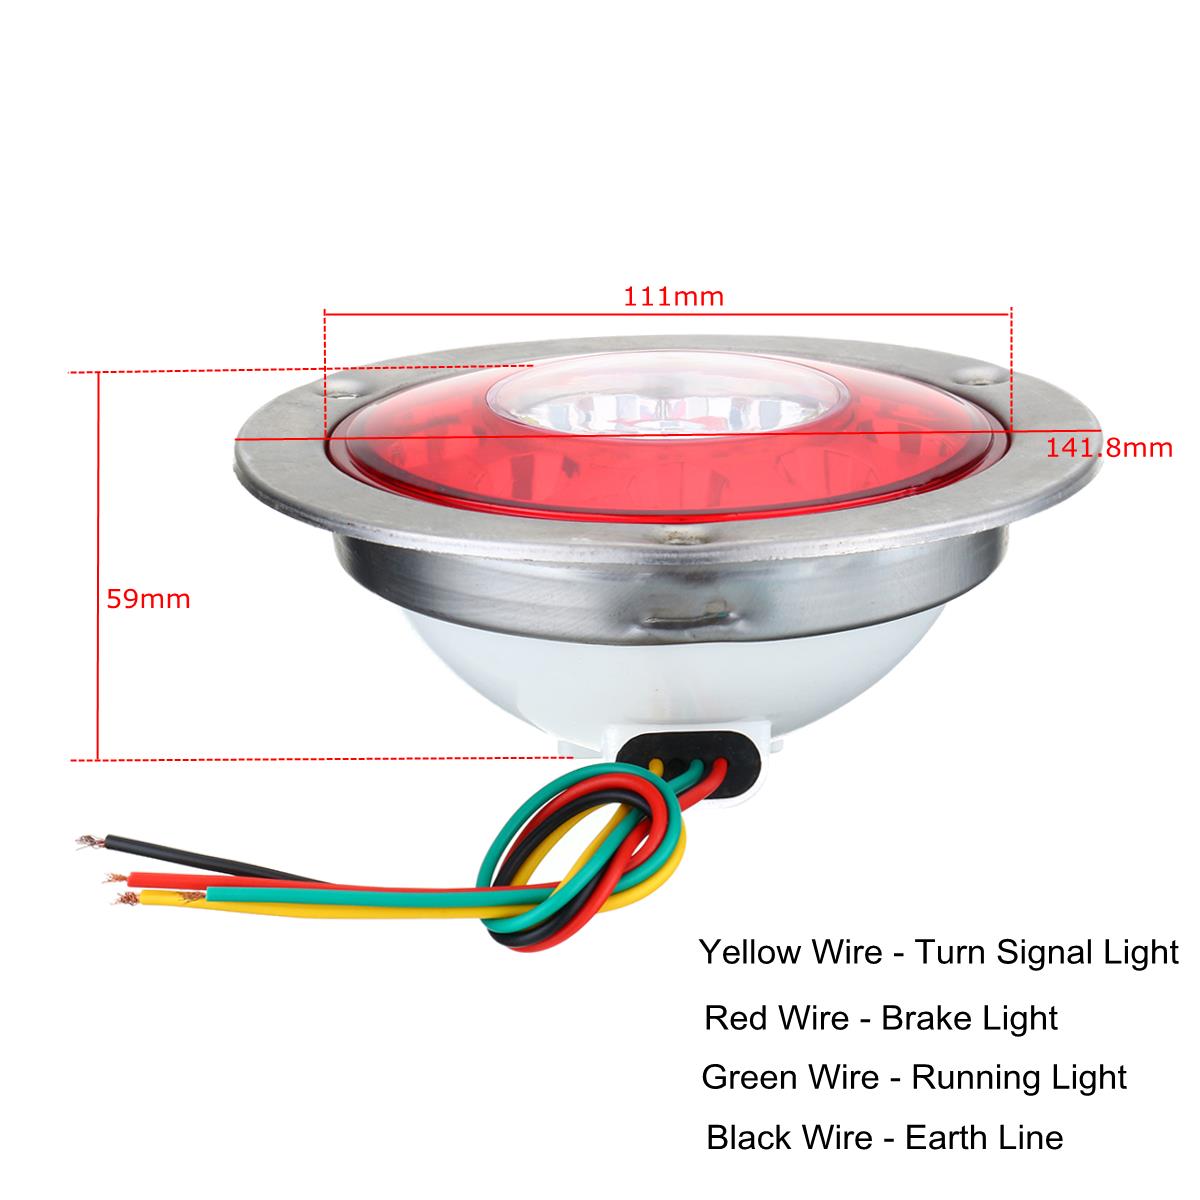 19-LED-Truck-Lorry-Brake-Lights-Stop-Turn-Tail-Lamp-Stainless-Steel-Turn-Signal-Stop-Lights-1274015